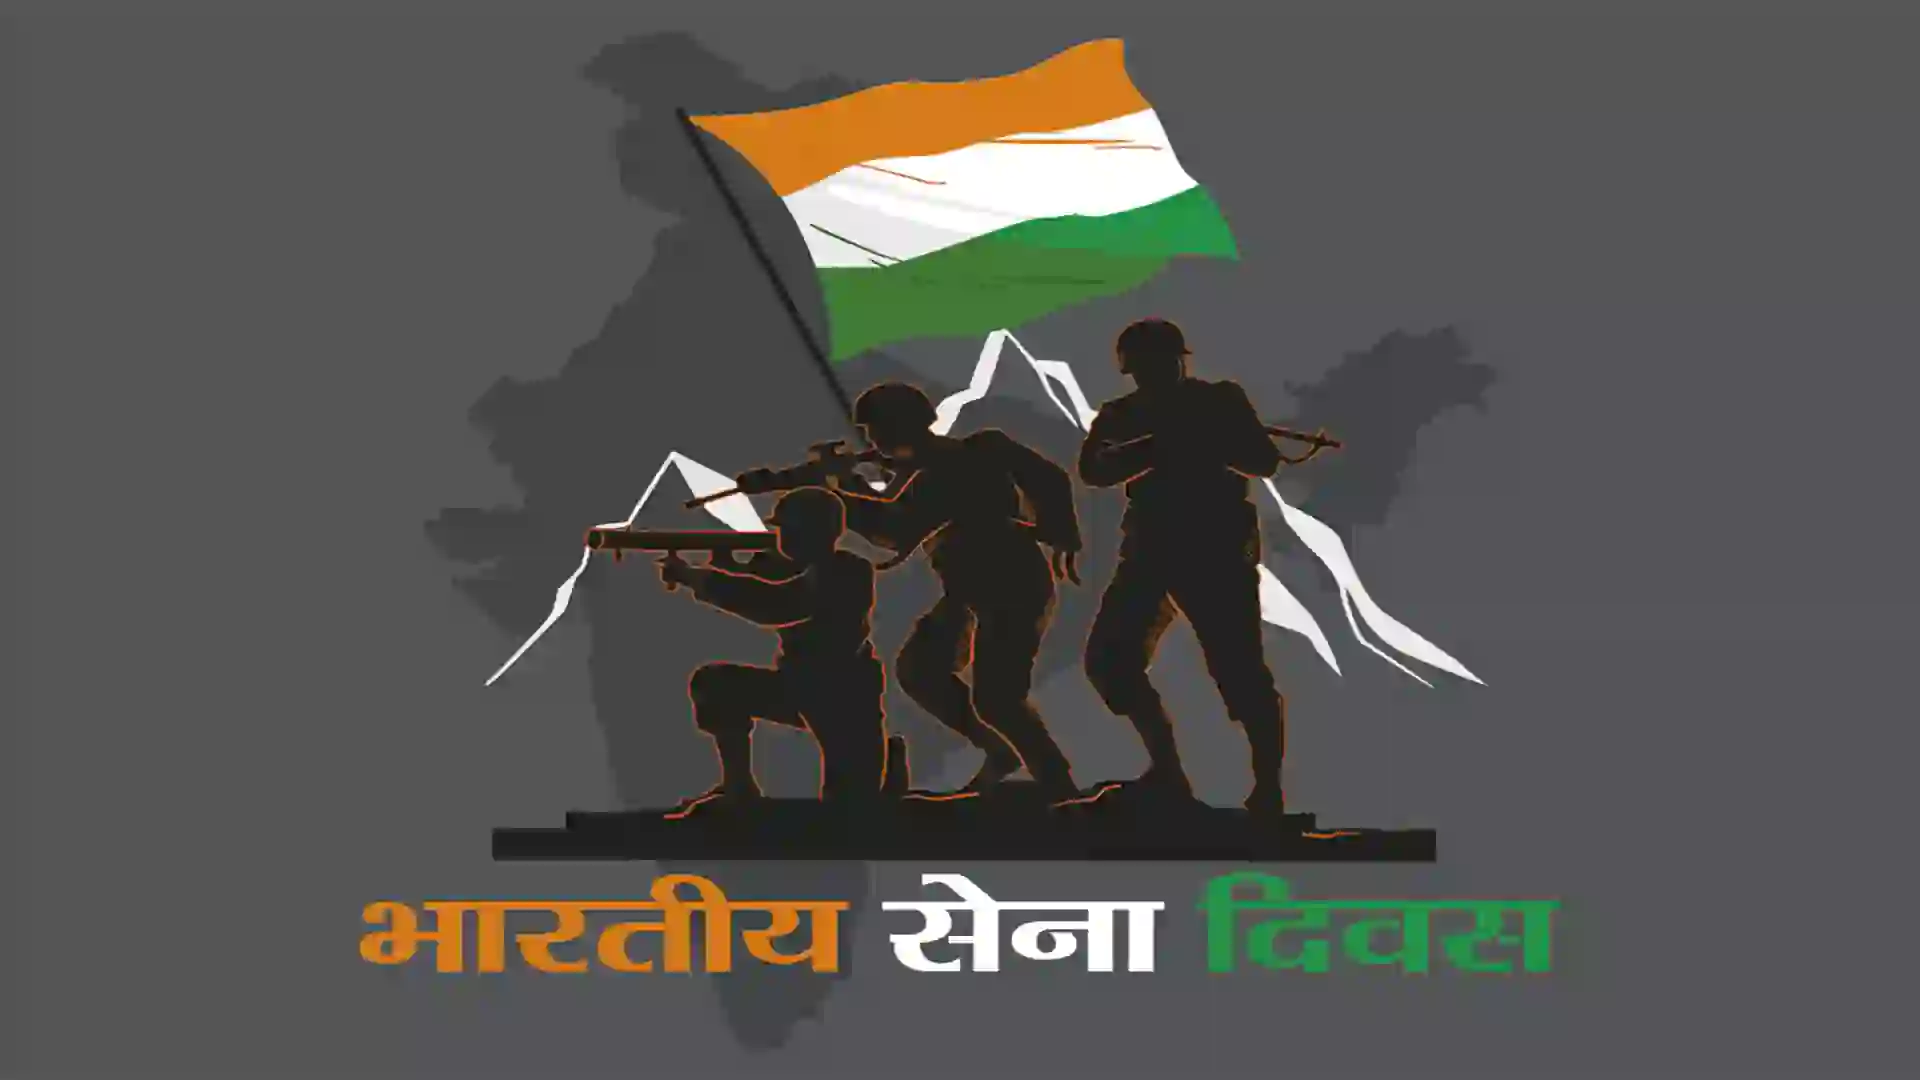 Indian Army Day This Post Design By The Revolution Deshbhakt Hindustani